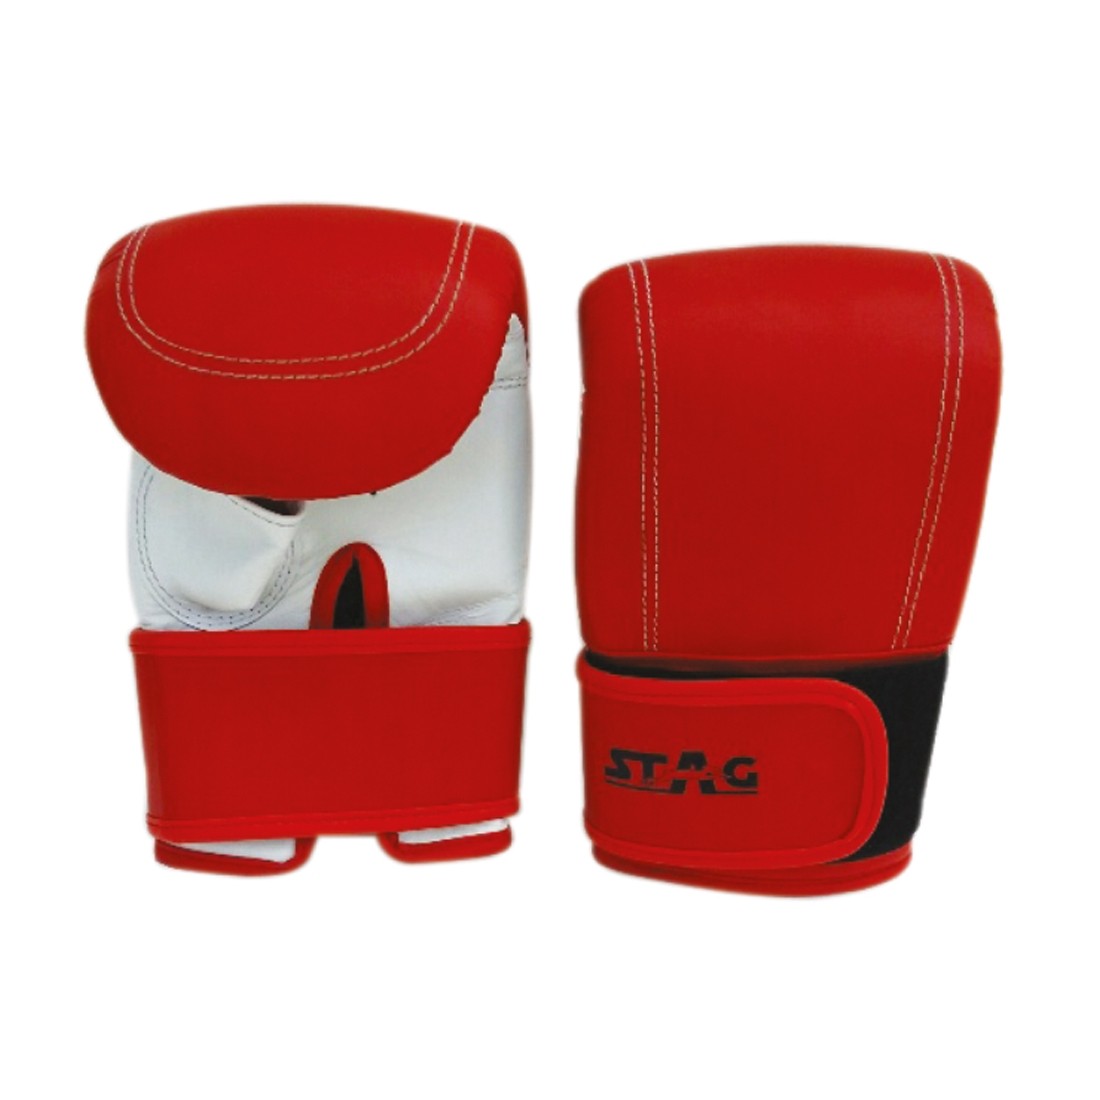 STAG PUNCHING GLOVES CUT THUMB 3 VELCRO SHEET PADDED STAG